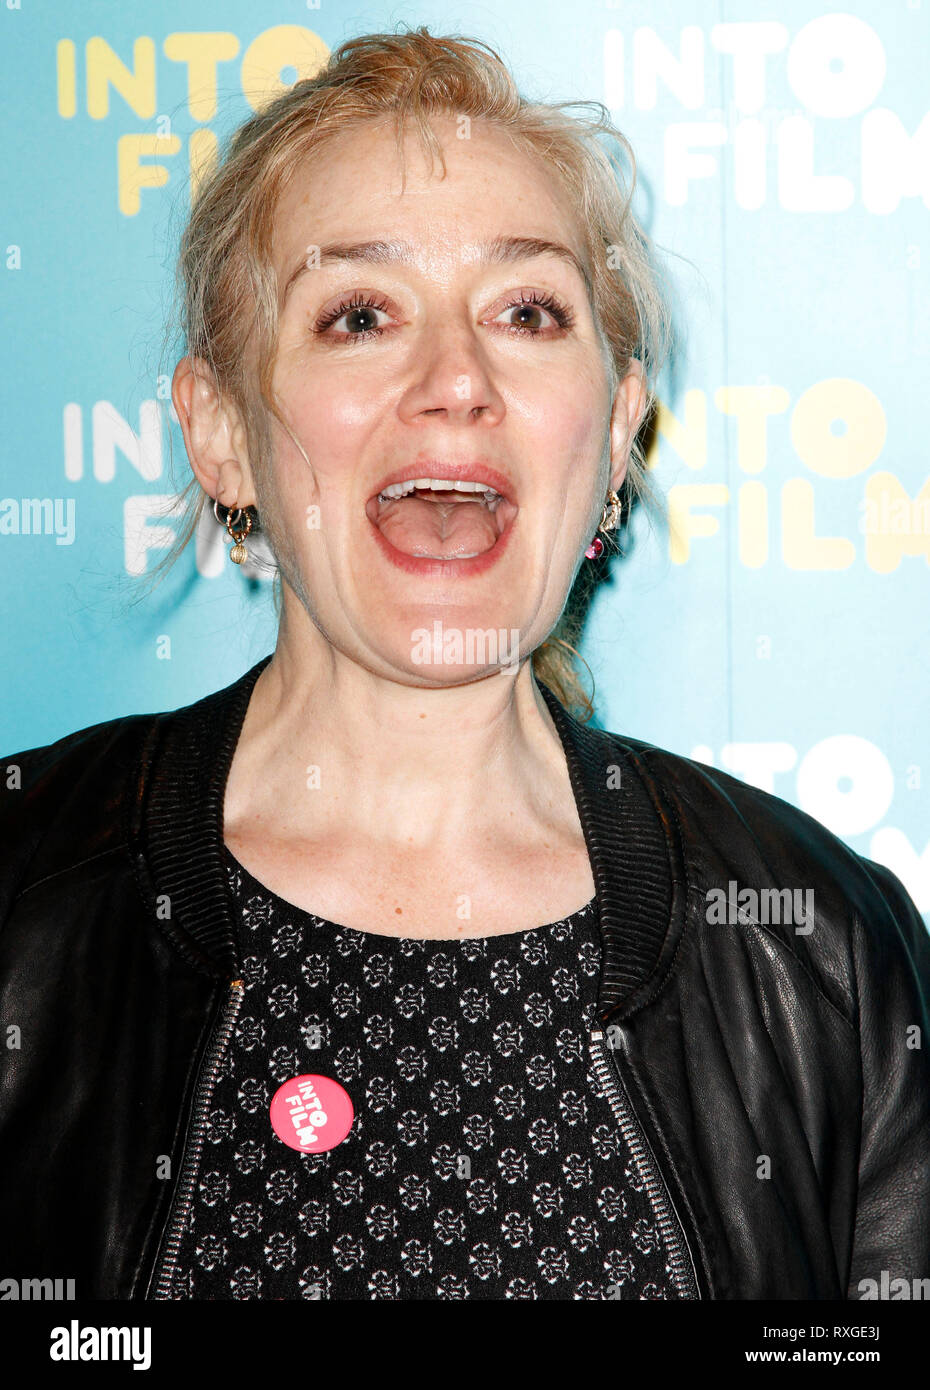 Mar 24, 2015 - London, England, UK - Into Film Awards 2015, Empire Cinema, Leicester Square - Red Carpet Arrivals Photo Shows: Sophie Thompson Stock Photo